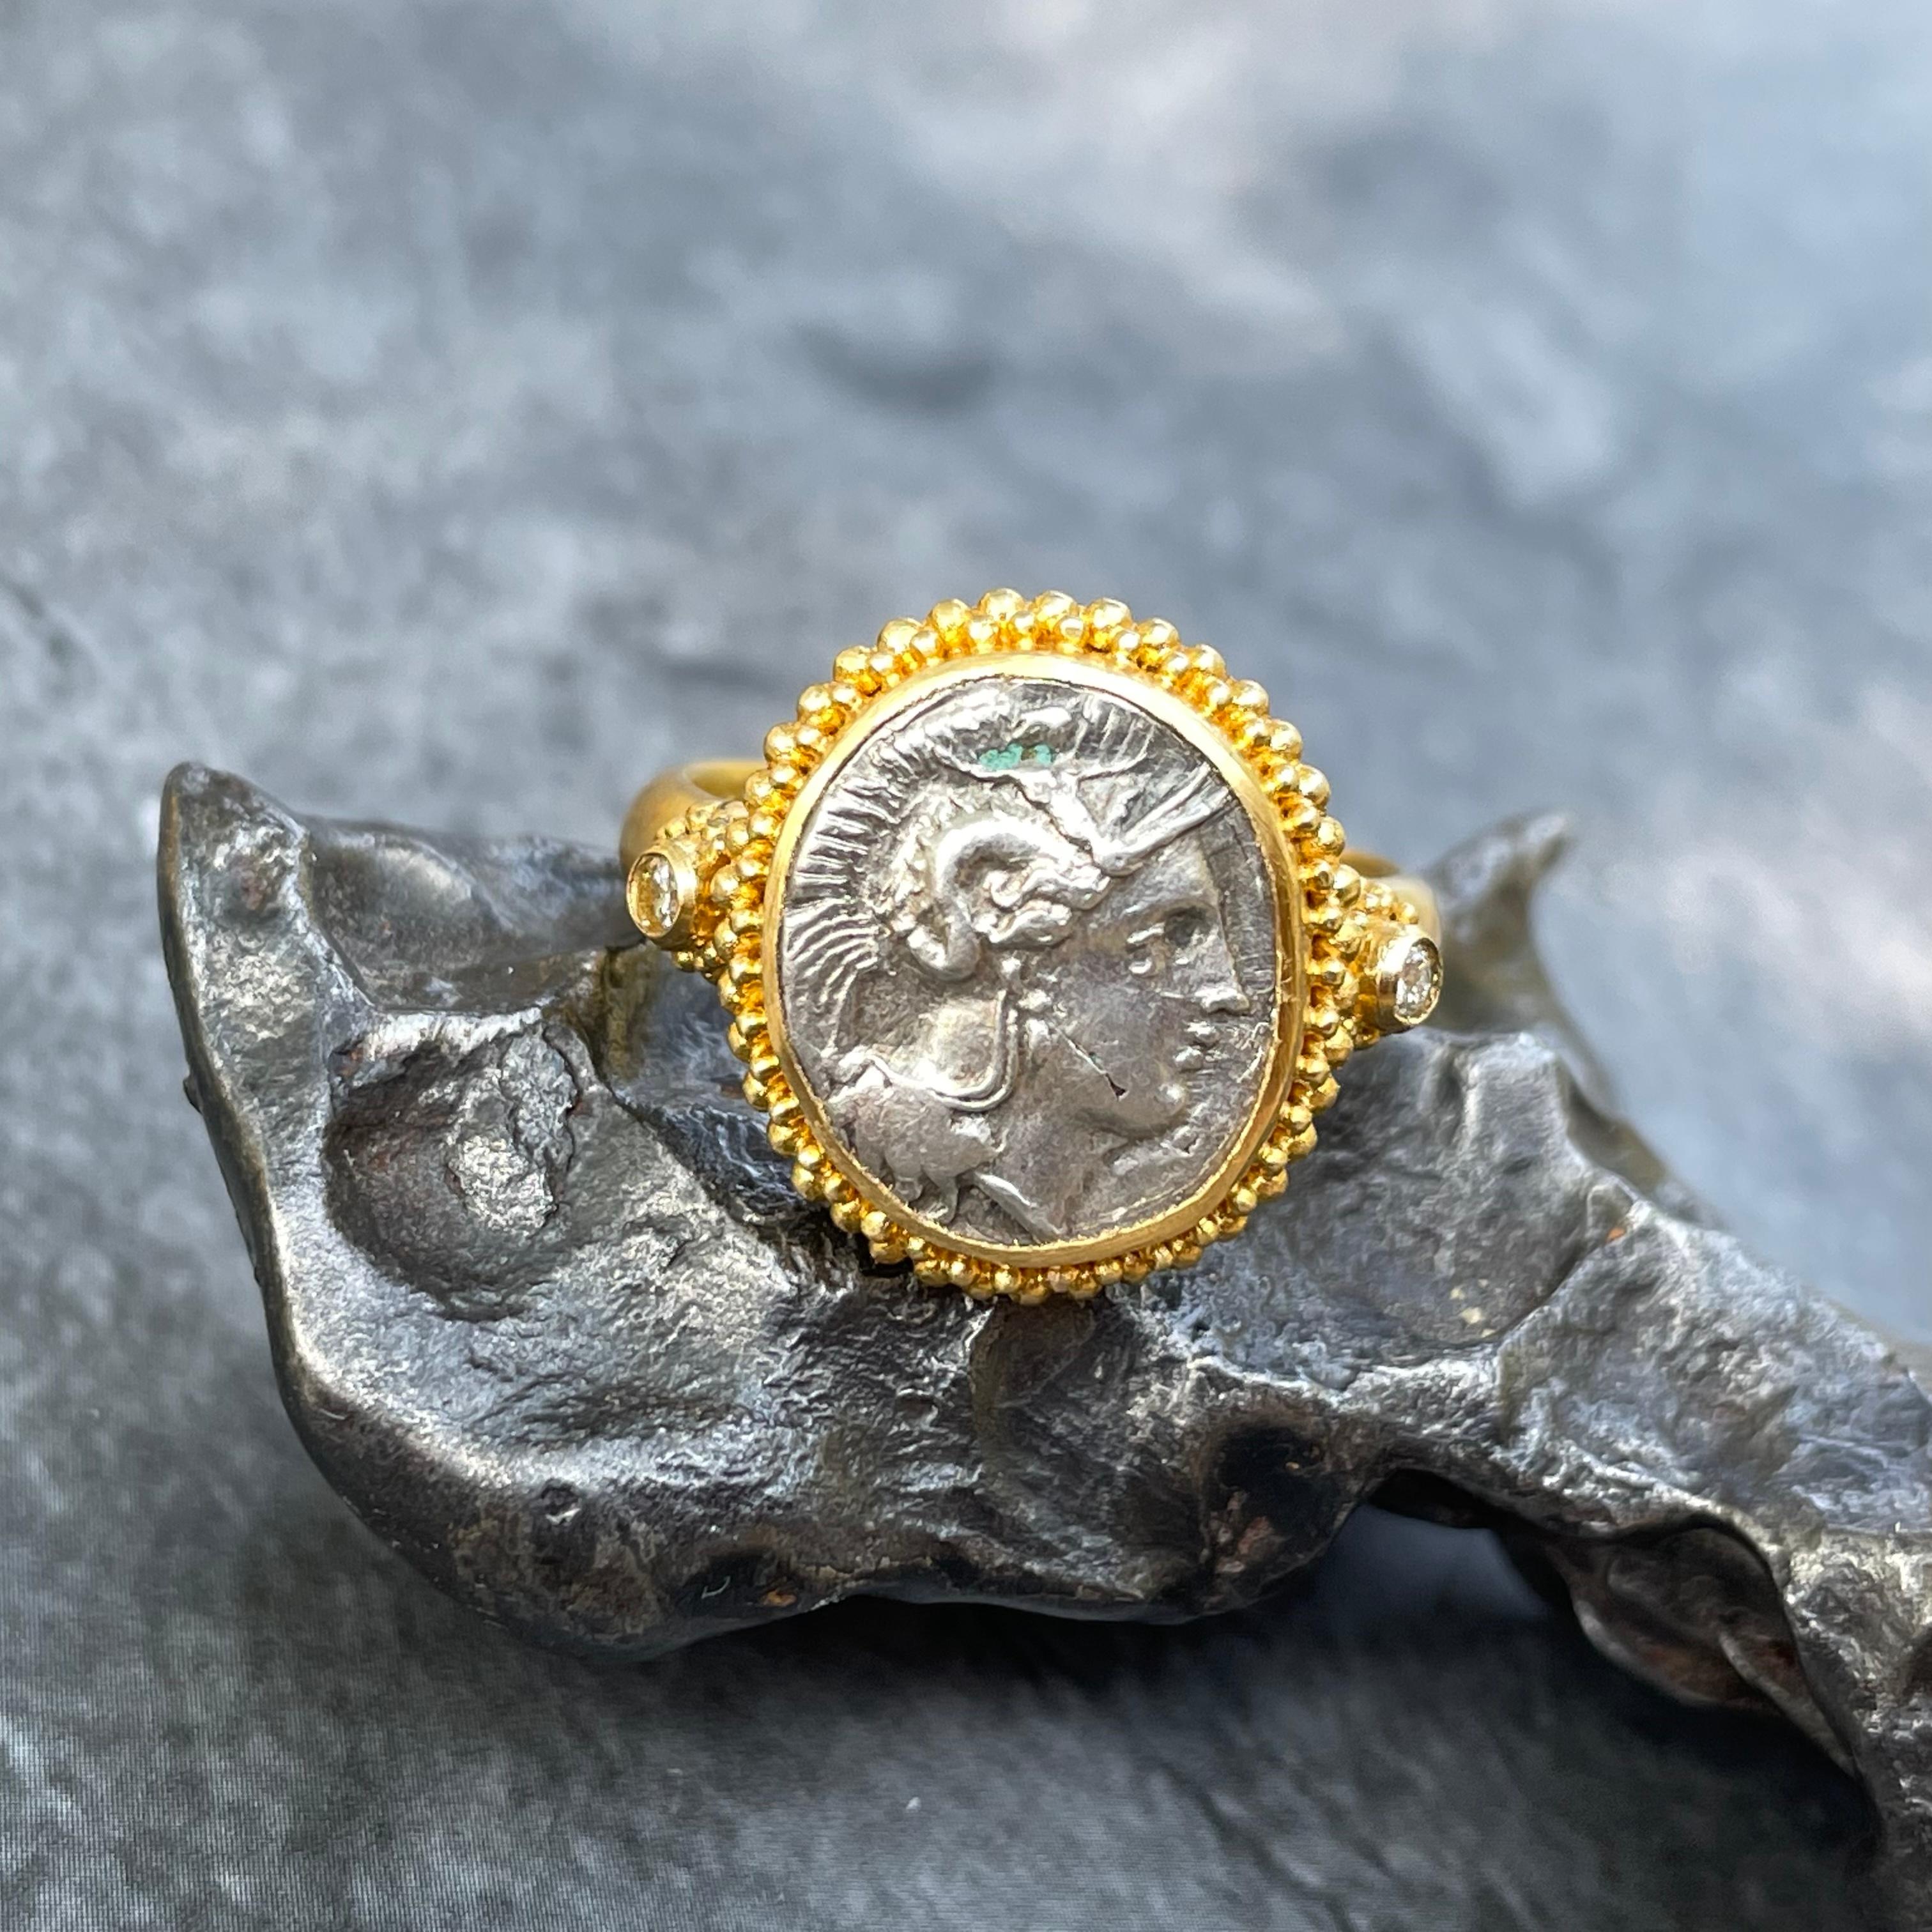 A authentic ancient coin with classic image of the goddess Athena wearing a crested helmet is displayed between two 1.8 MM diamonds and surrounded by stacked large and small hand applied granulation in this Steven Battelle high carat gold creation. 